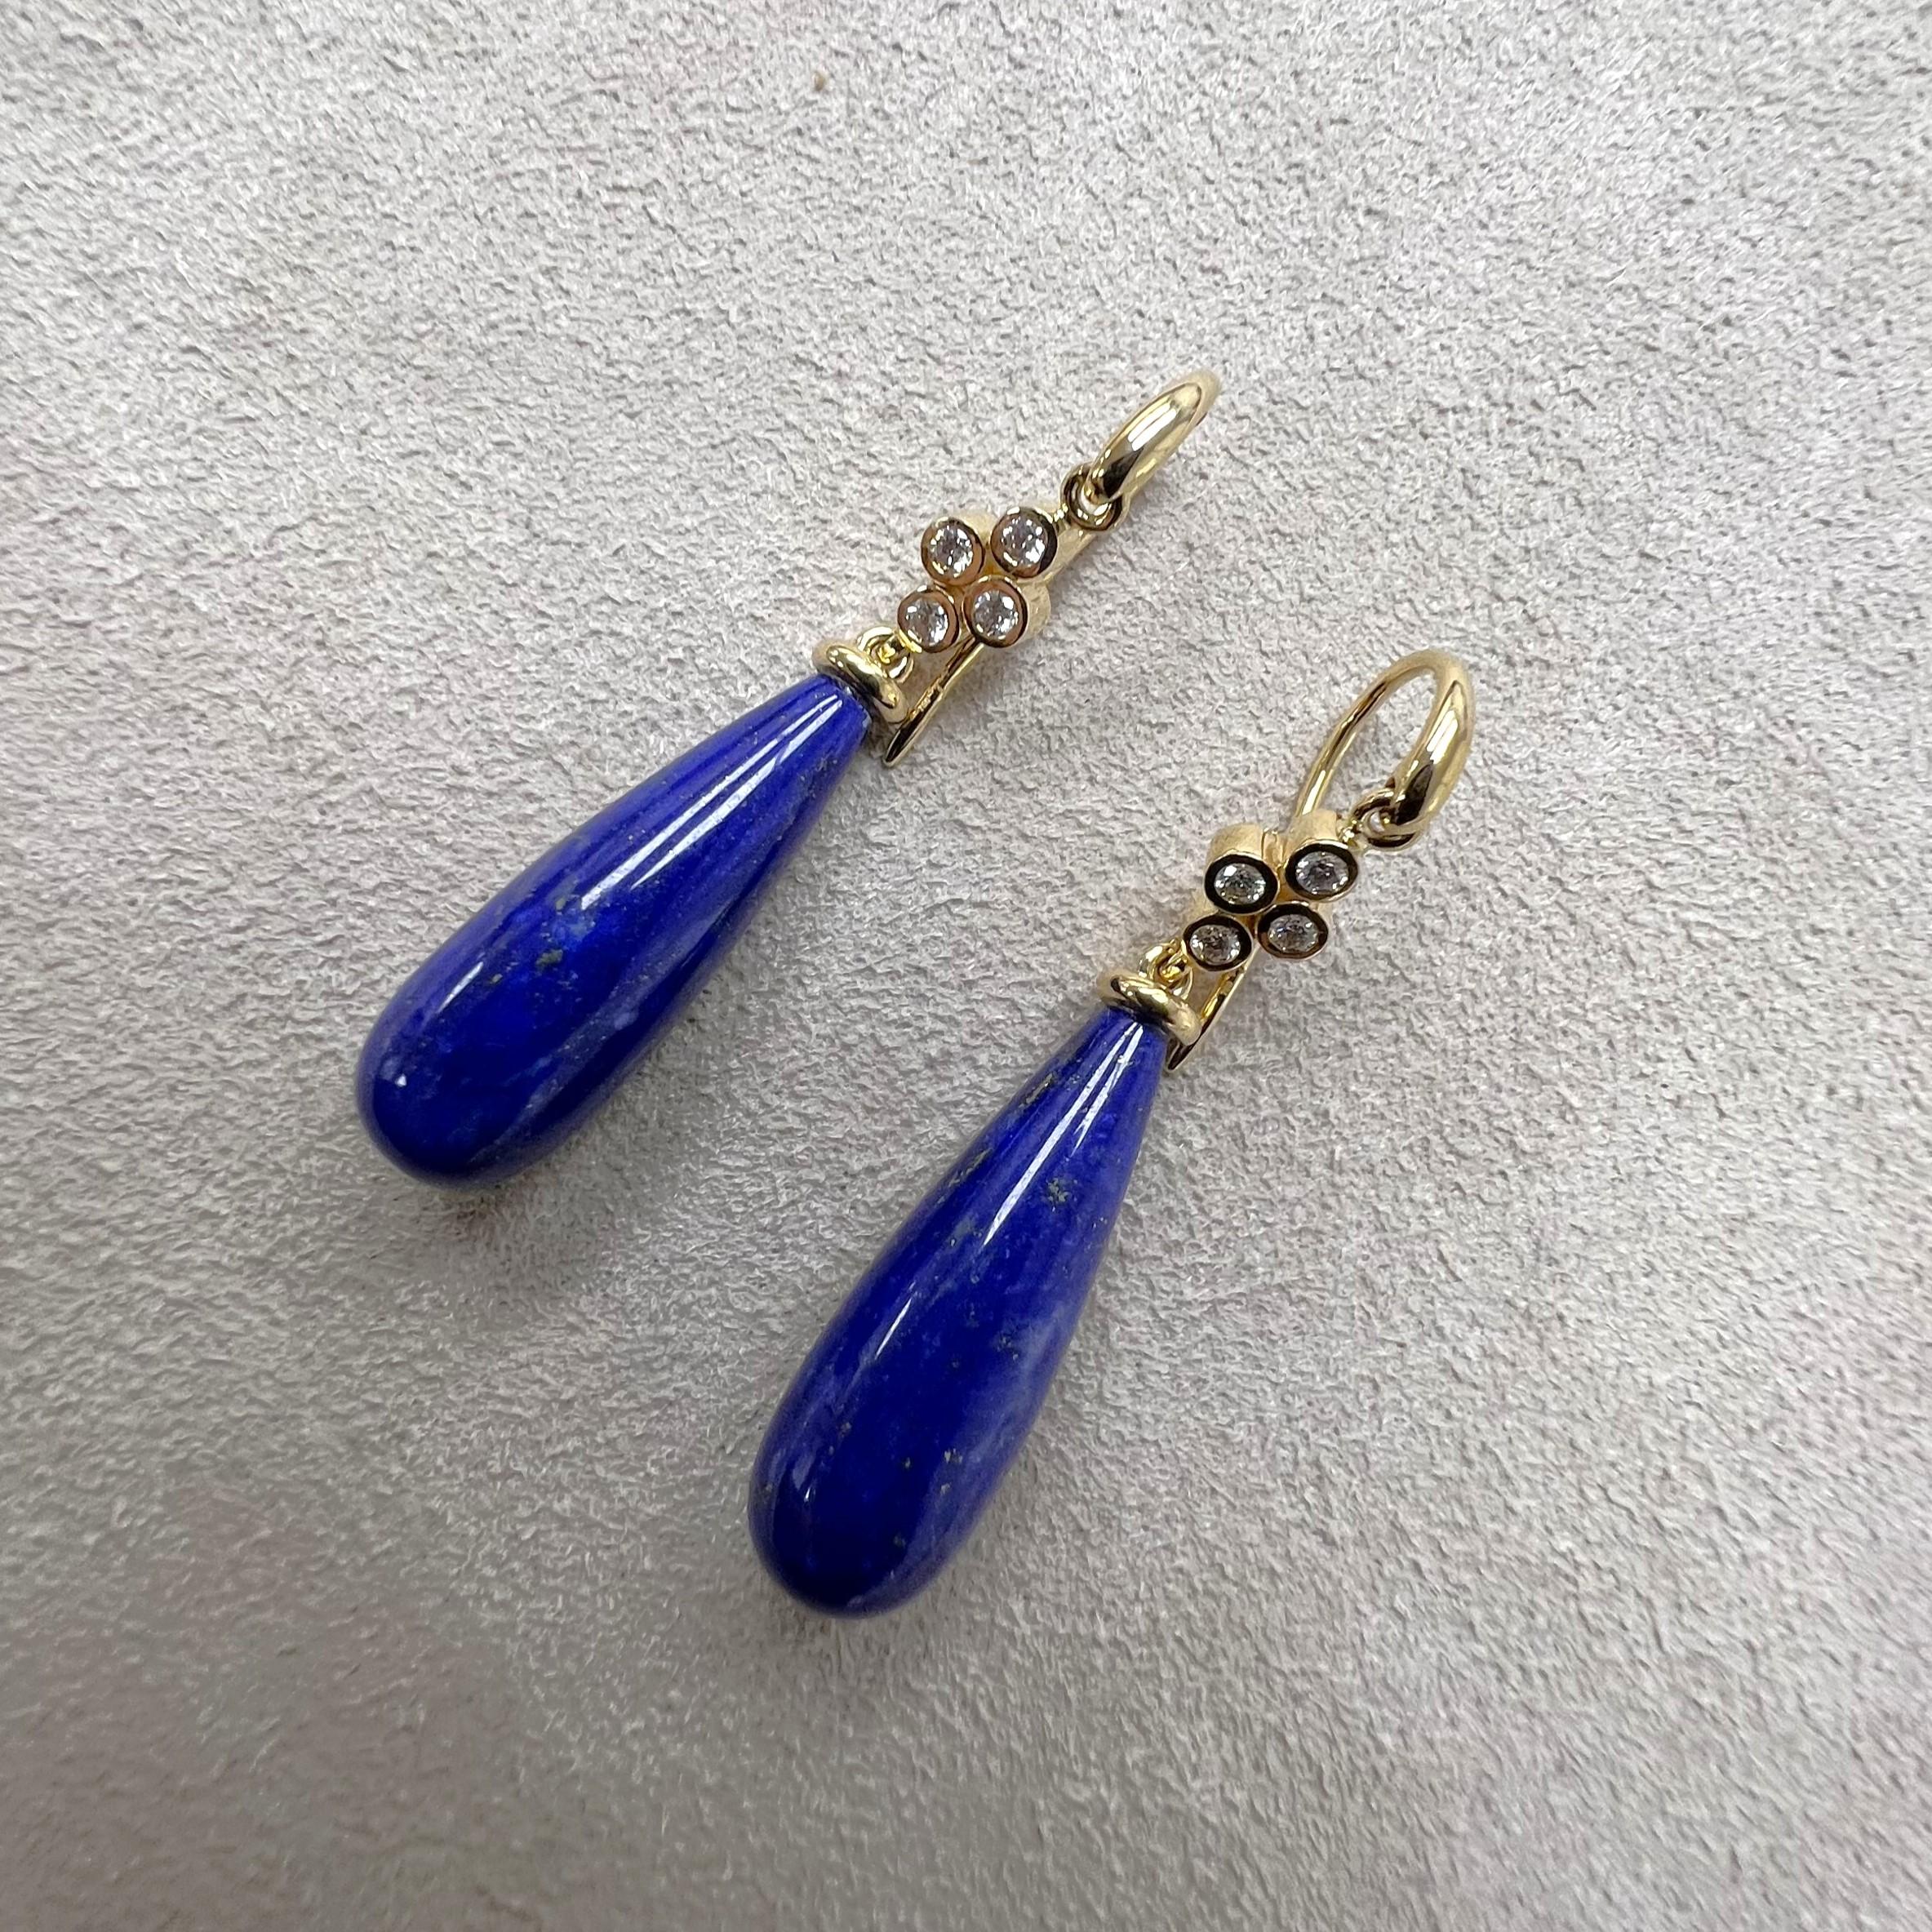 Created in 18 karat yellow gold
Lapis Lazuli 28 carats approx.
Bright diamonds 0.20 carat approx.
French wire for pierced ears
Limited edition


About the Designers

Drawing inspiration from little things, Dharmesh & Namrata Kothari have created an